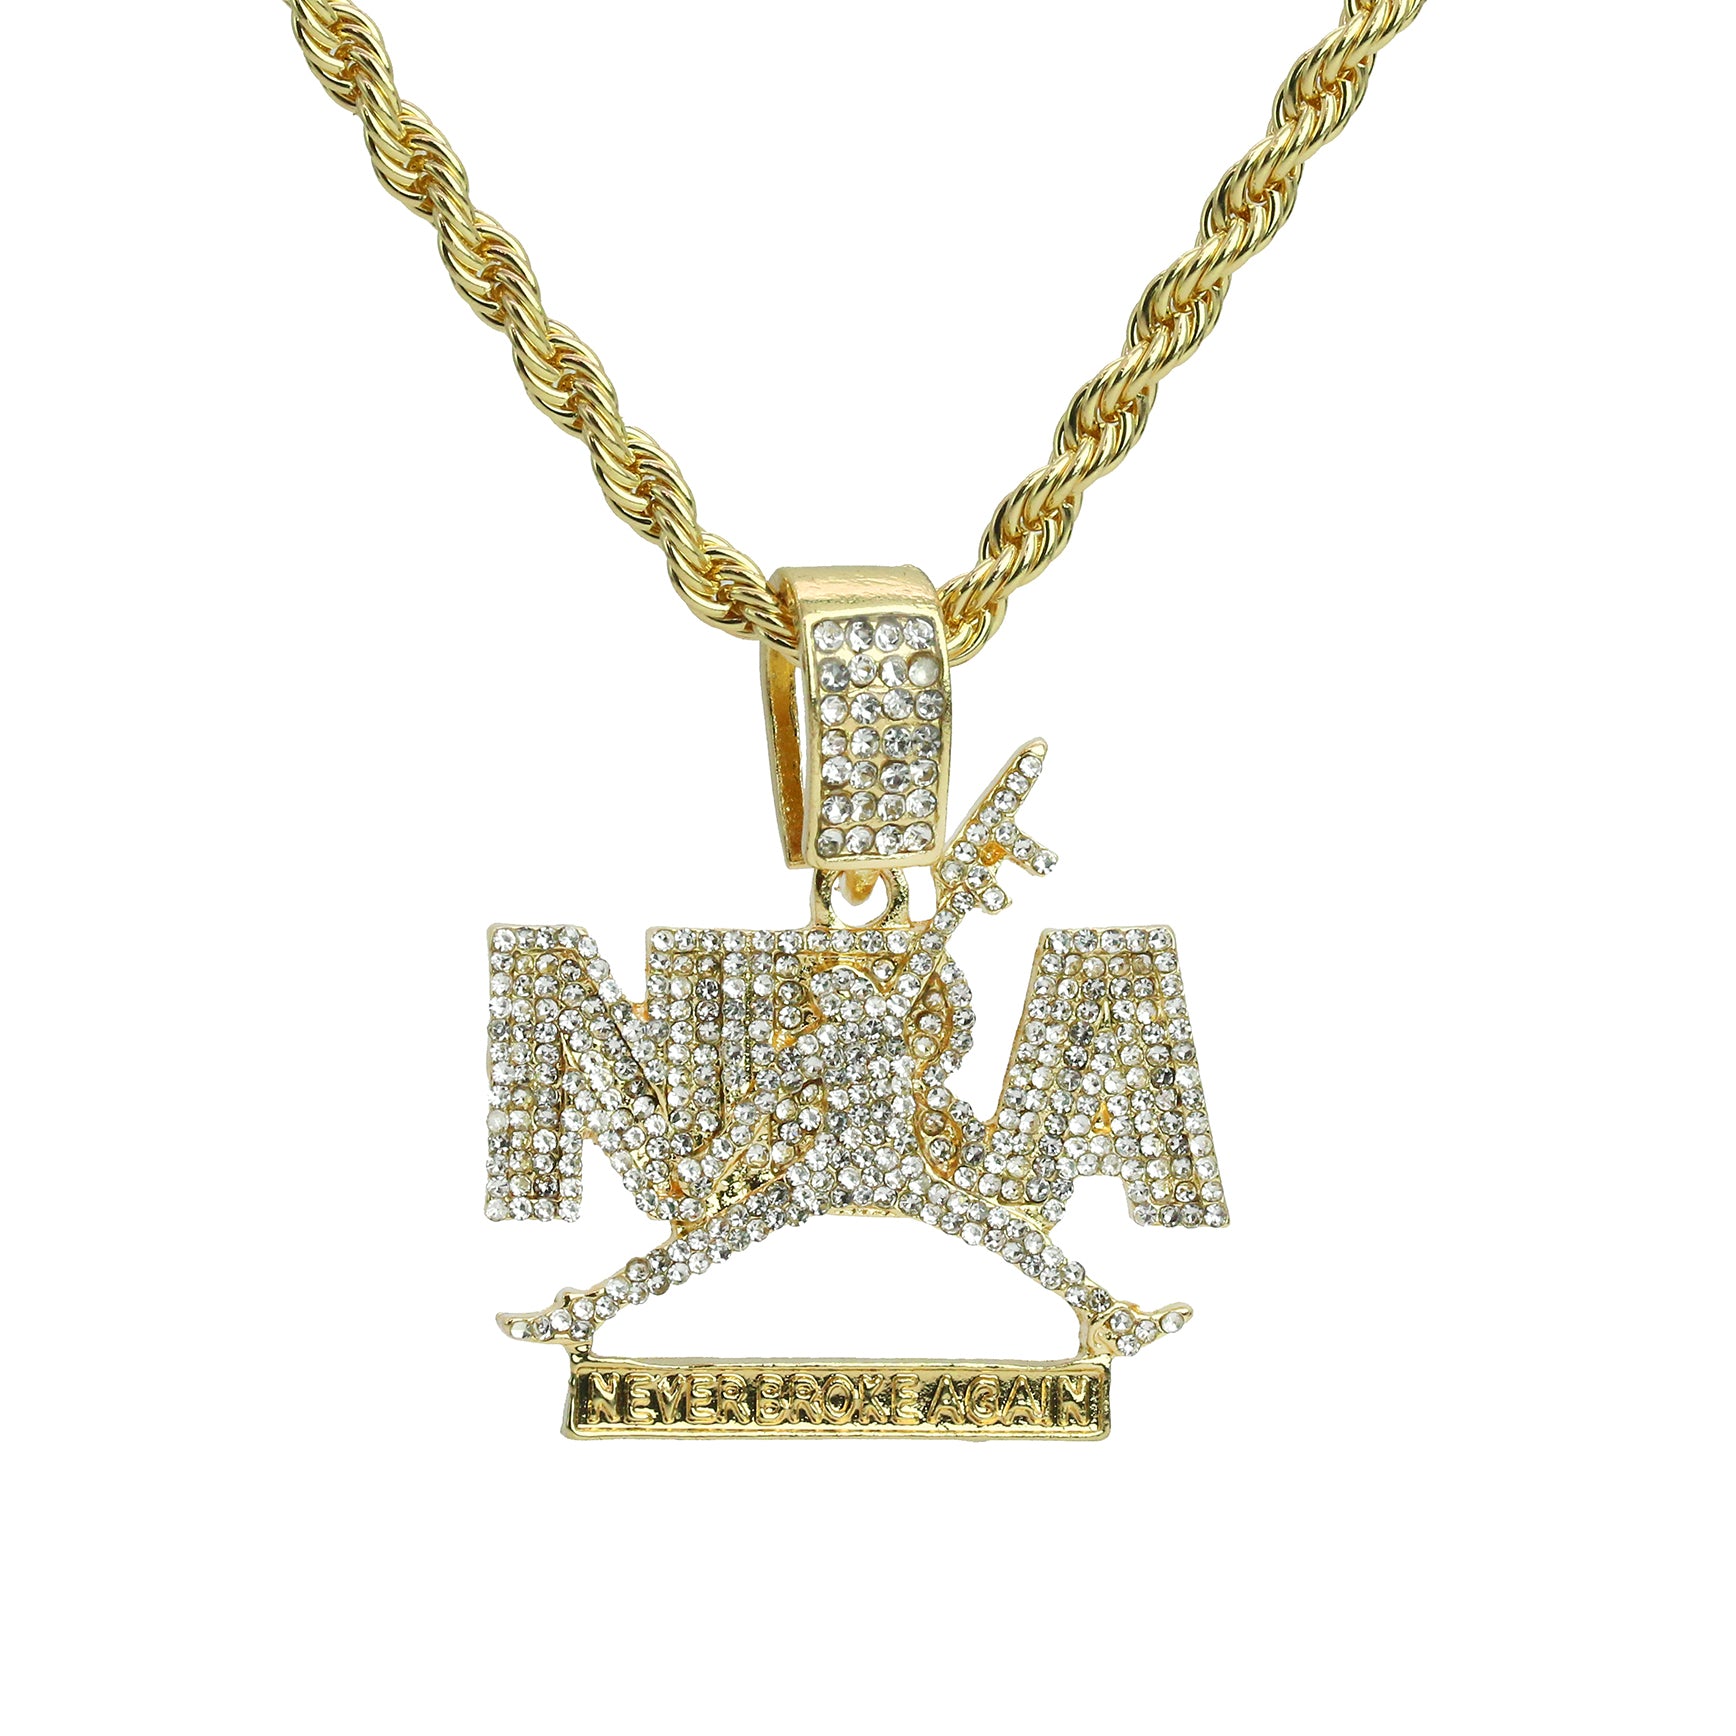 Accessories, Nba Young Boy Never Broke Again Chain